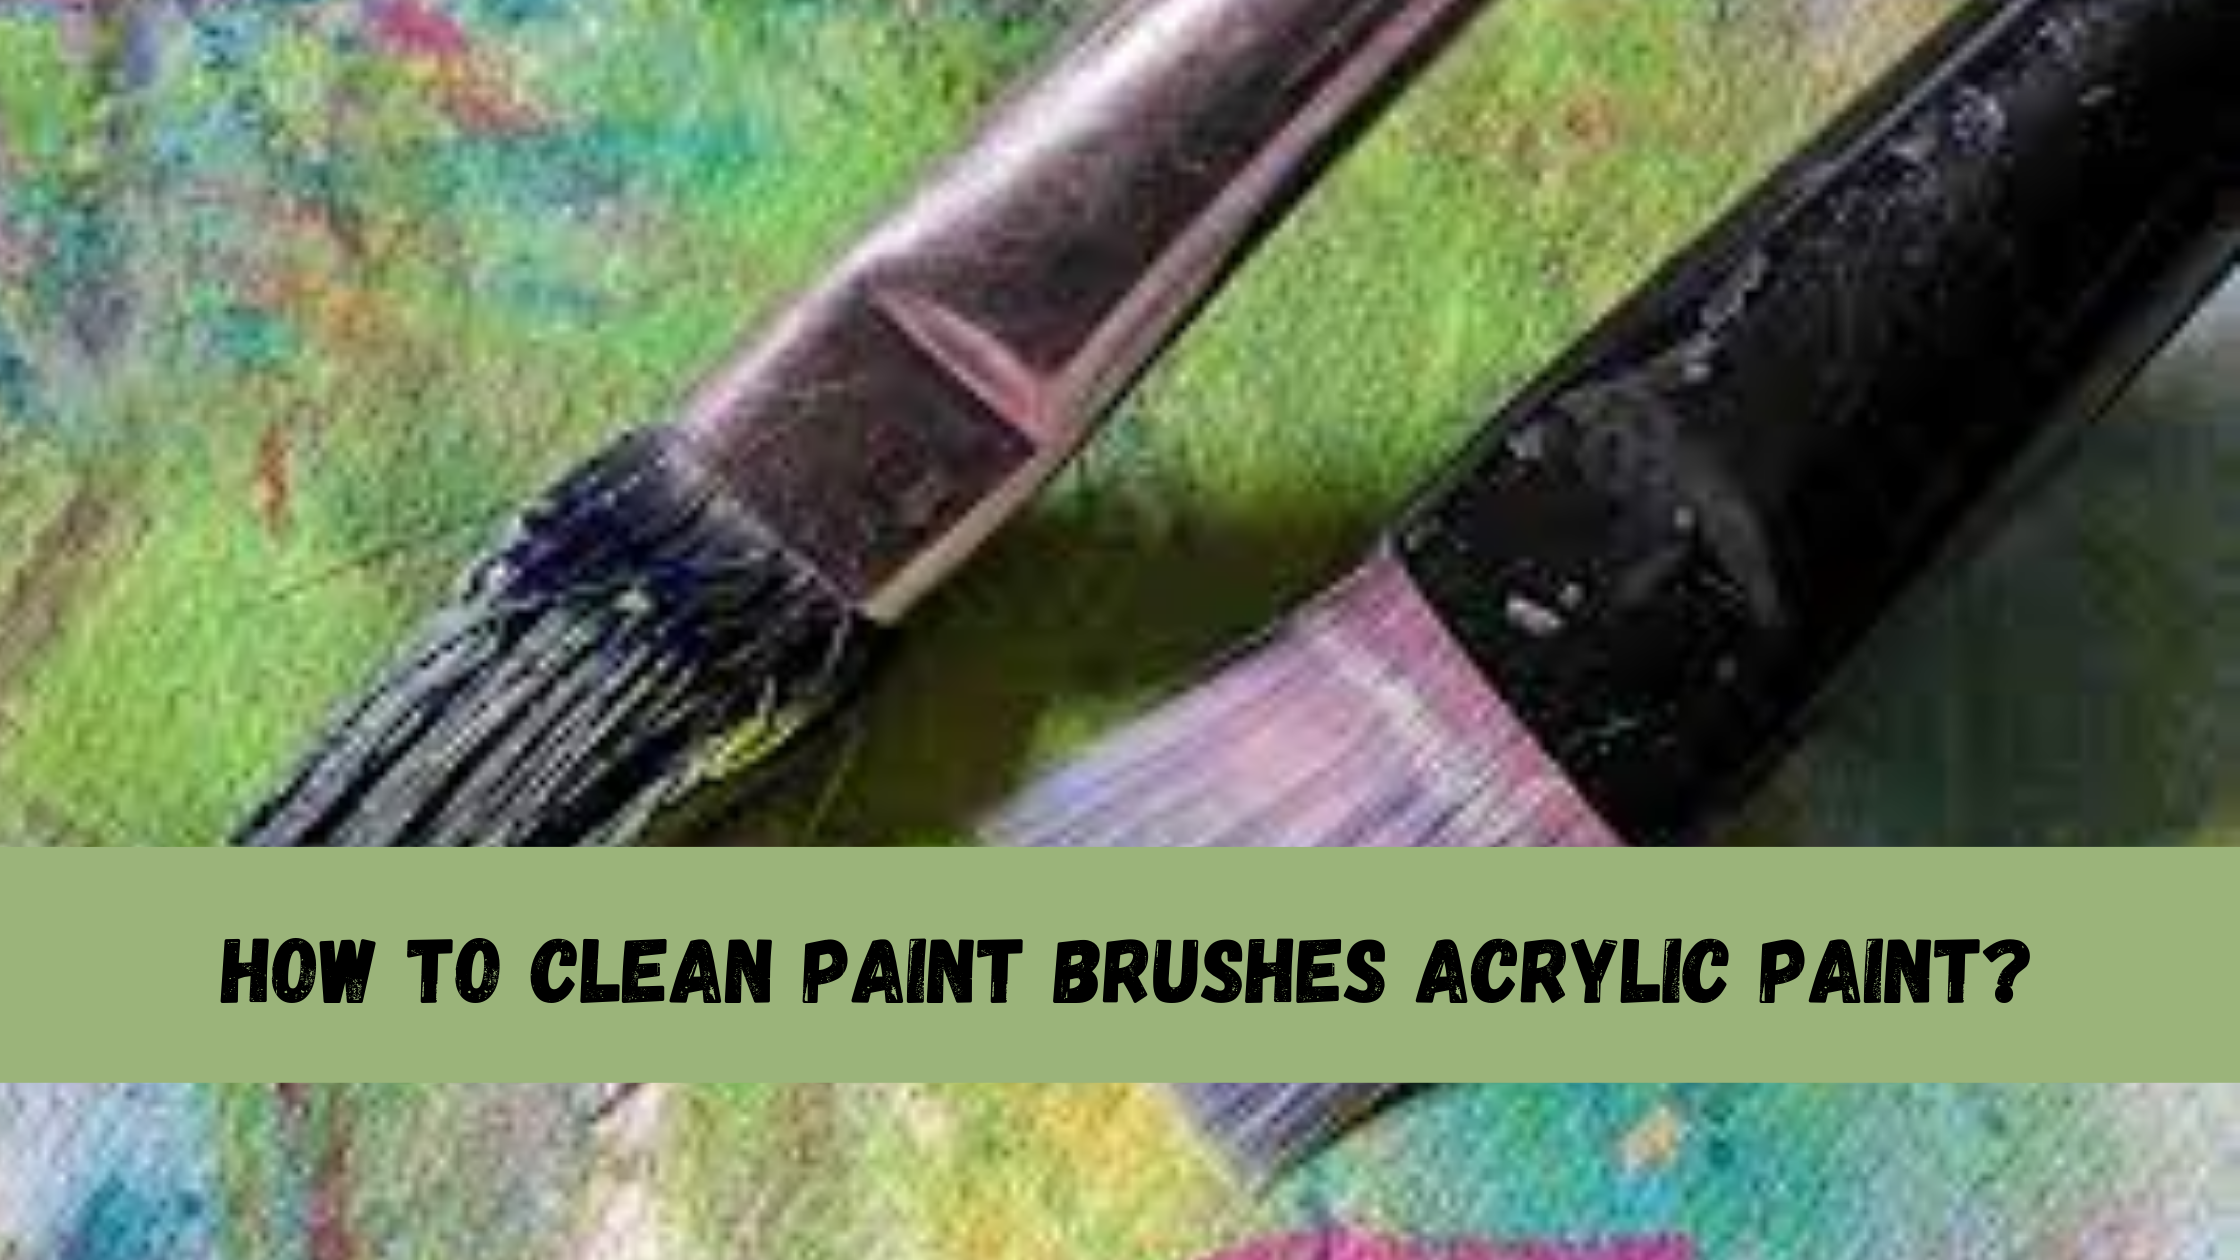 How To Clean Paint Brushes Acrylic Paint? 